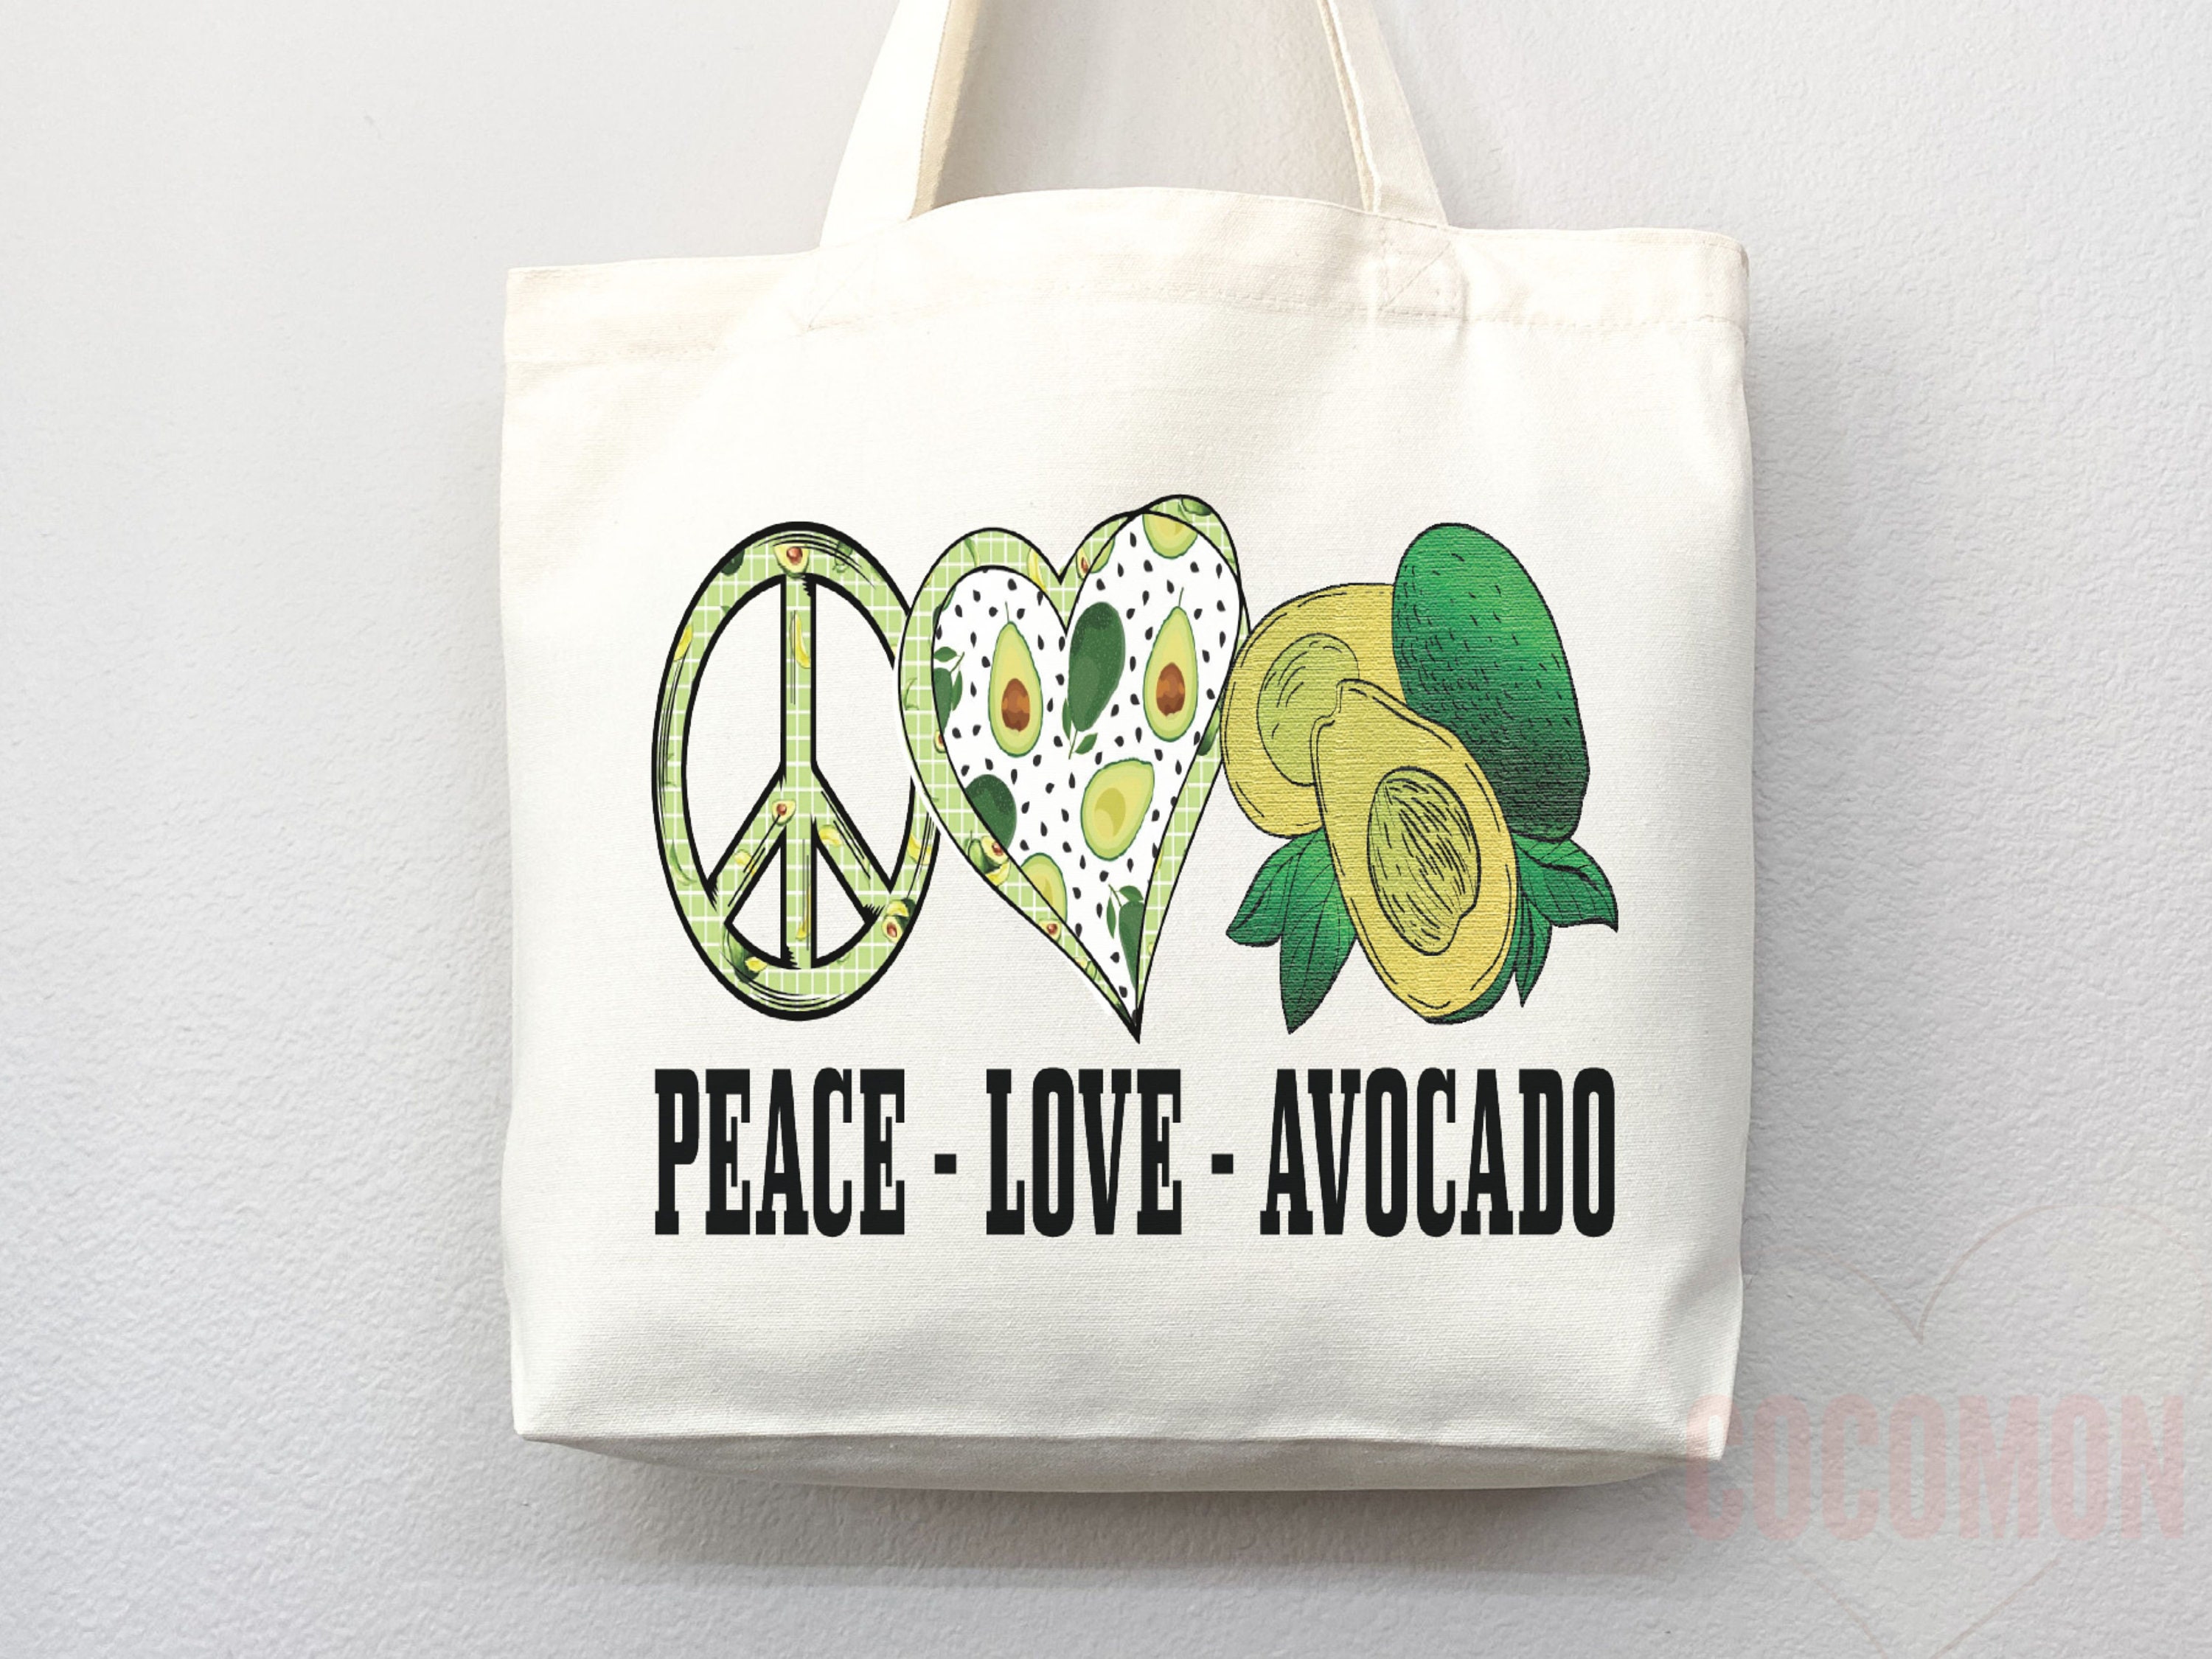 Cheapest Solid Bright Avocado Green Color Tote Bag for Sale by